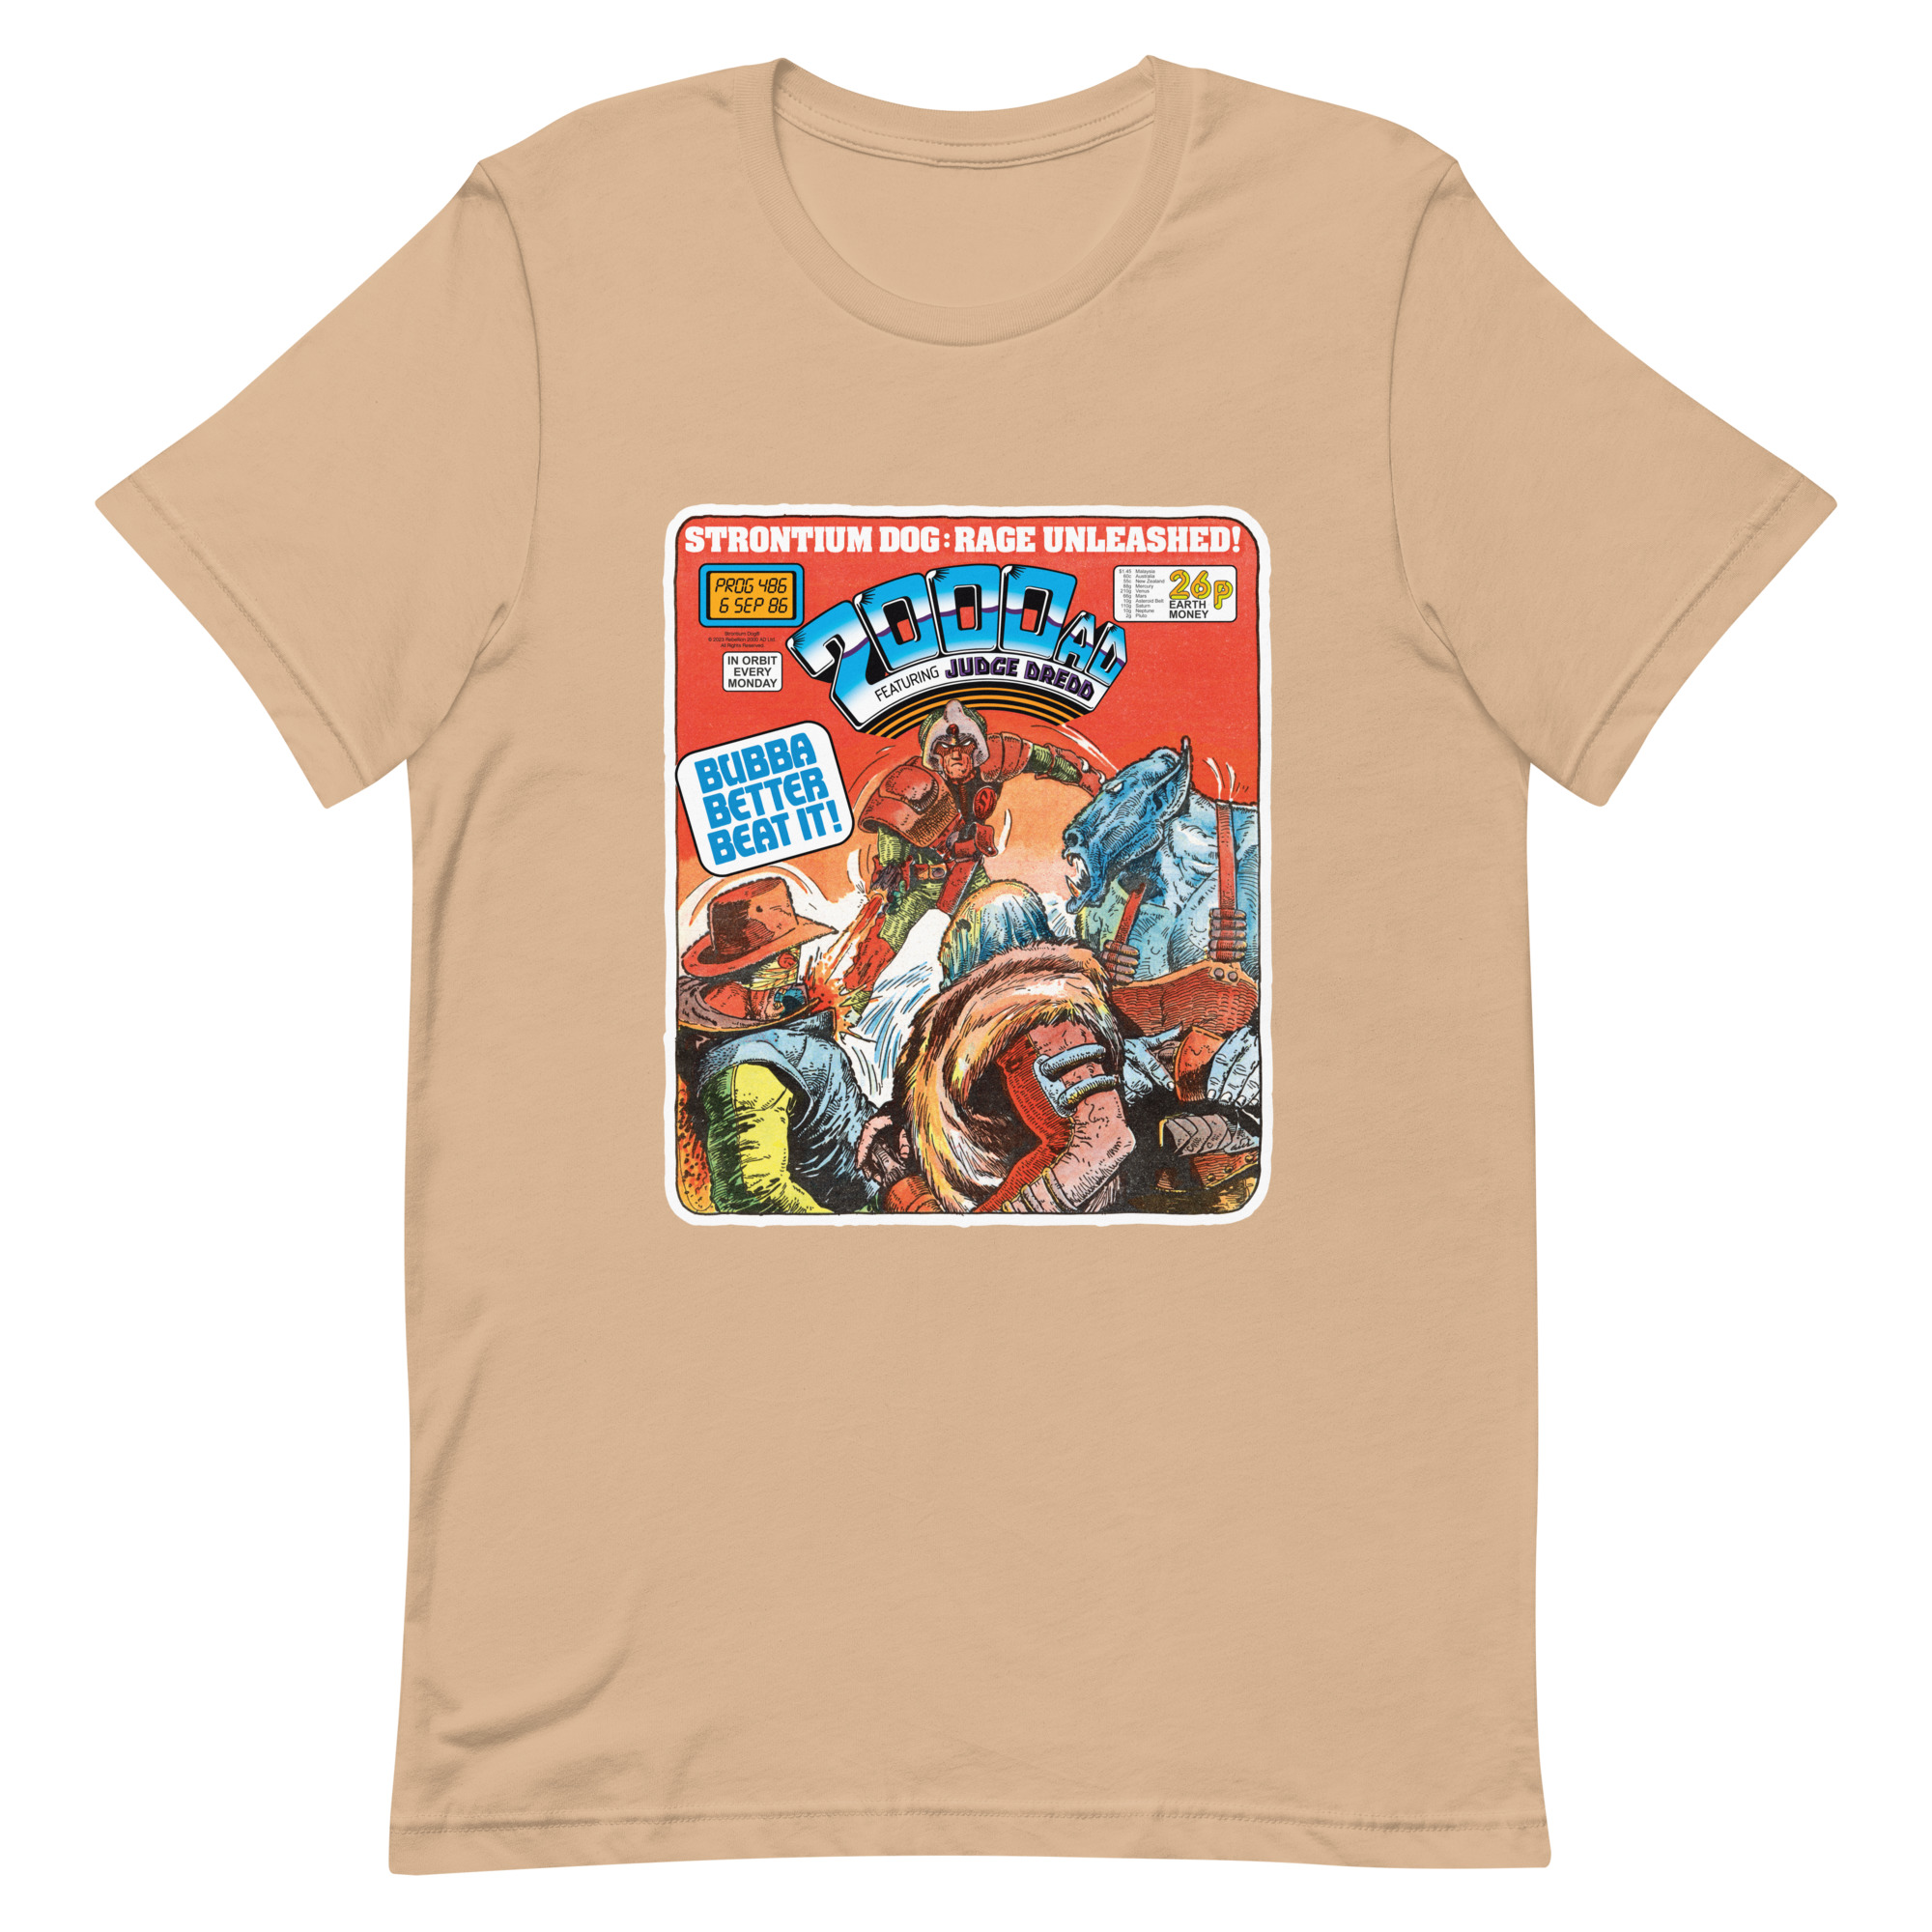 Beige Tshirt with a 'Classic' 2000 AD Cover image on the chest. In the image Strontium Dog faces off against three alien ruffians.